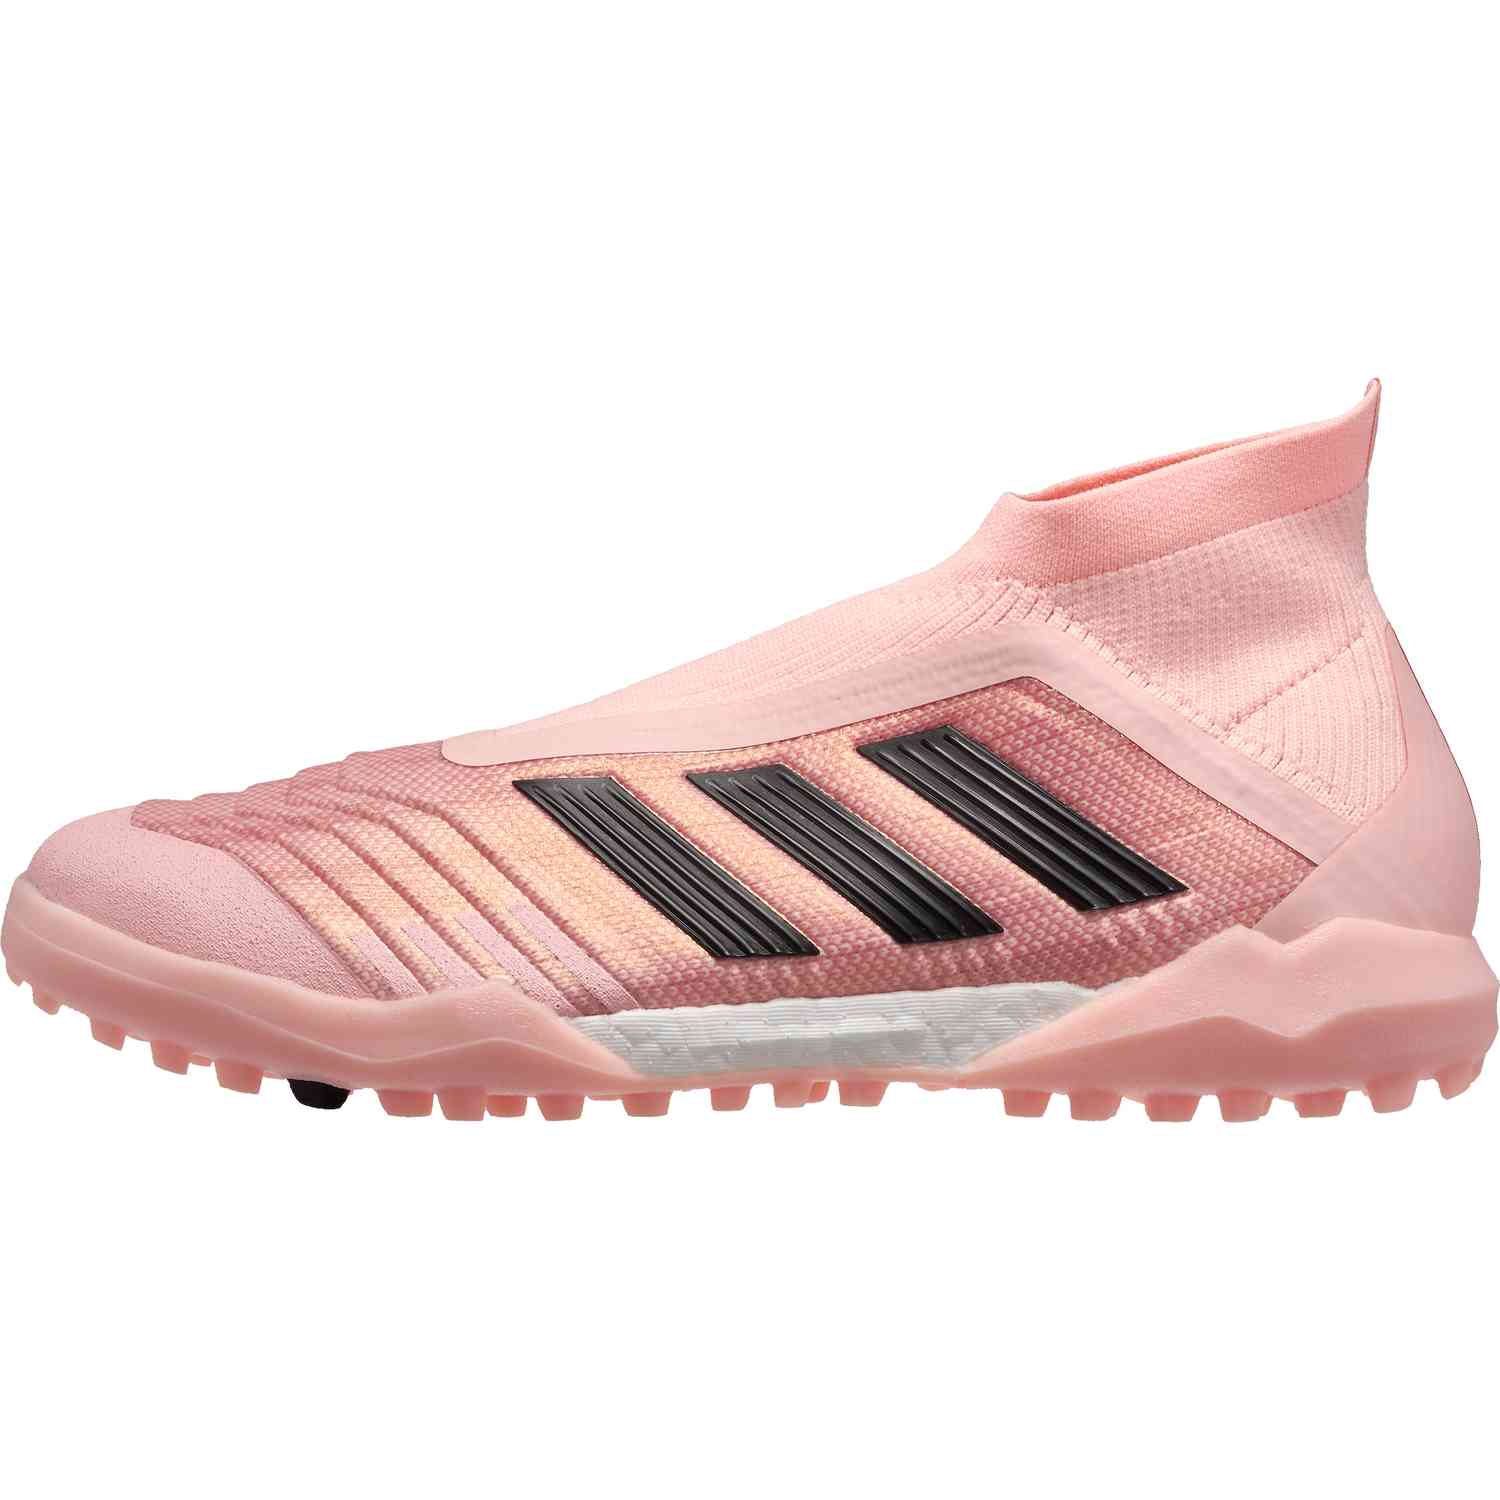 pink turf soccer shoes